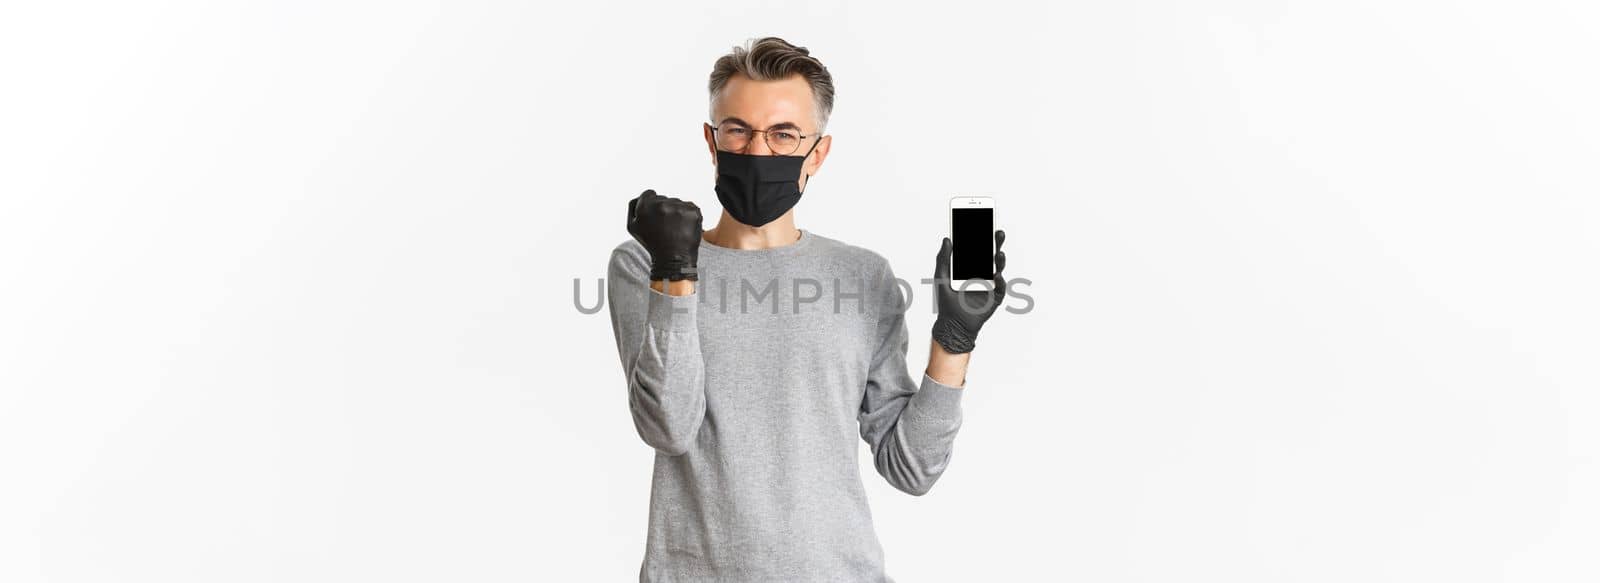 Concept of covid-19, social distancing and lifestyle. Happy middle-aged man in medical mask, gloves and glasses rejoicing, showing achievement on smartphone screen.